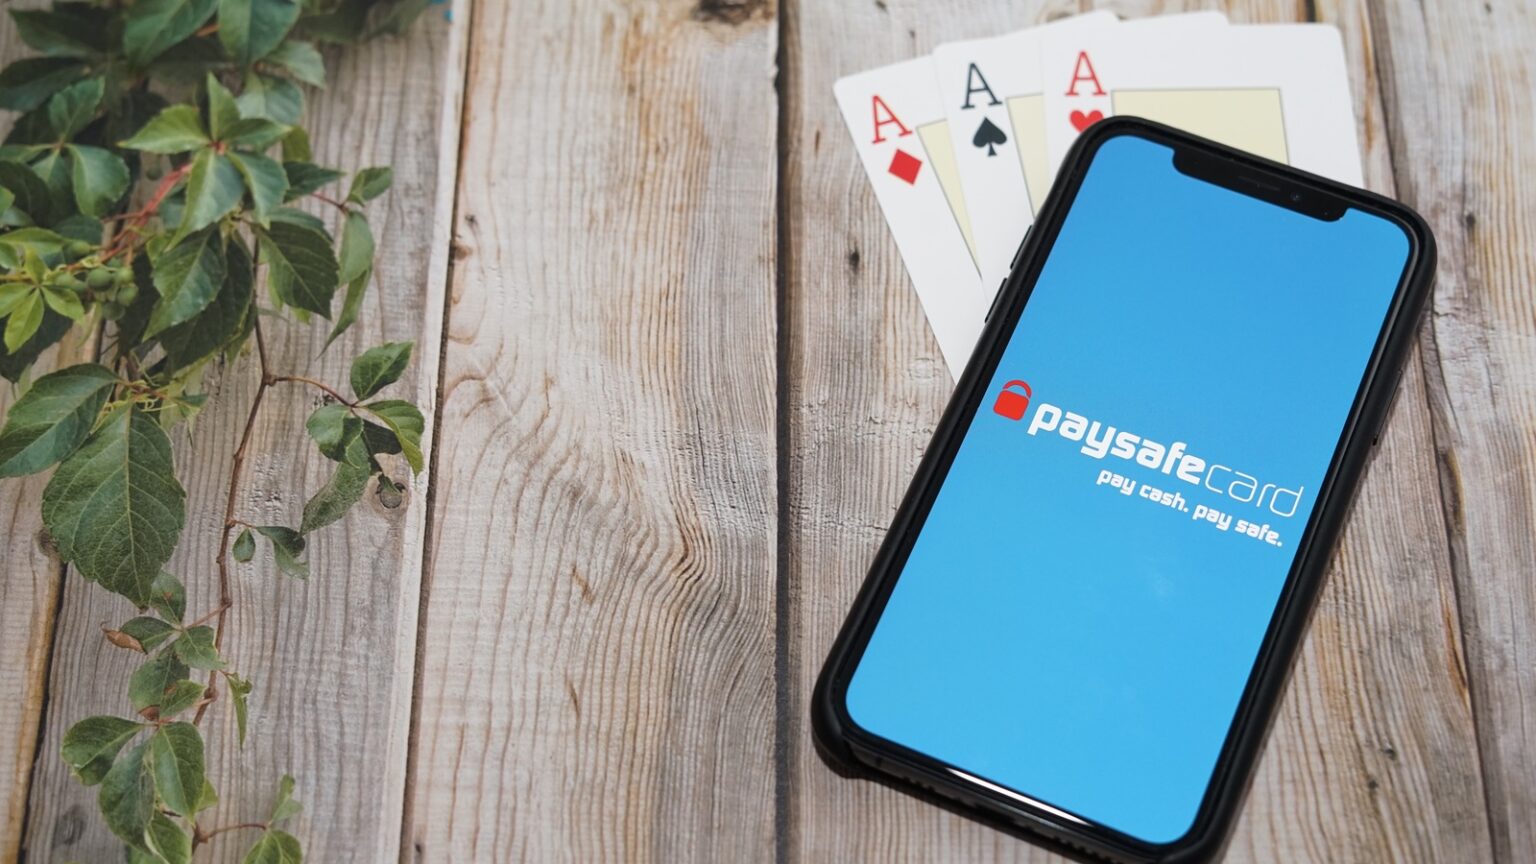 Online casinos with Paysafe Cards are extremely popular among gambling fans. Here's everything you need to know.